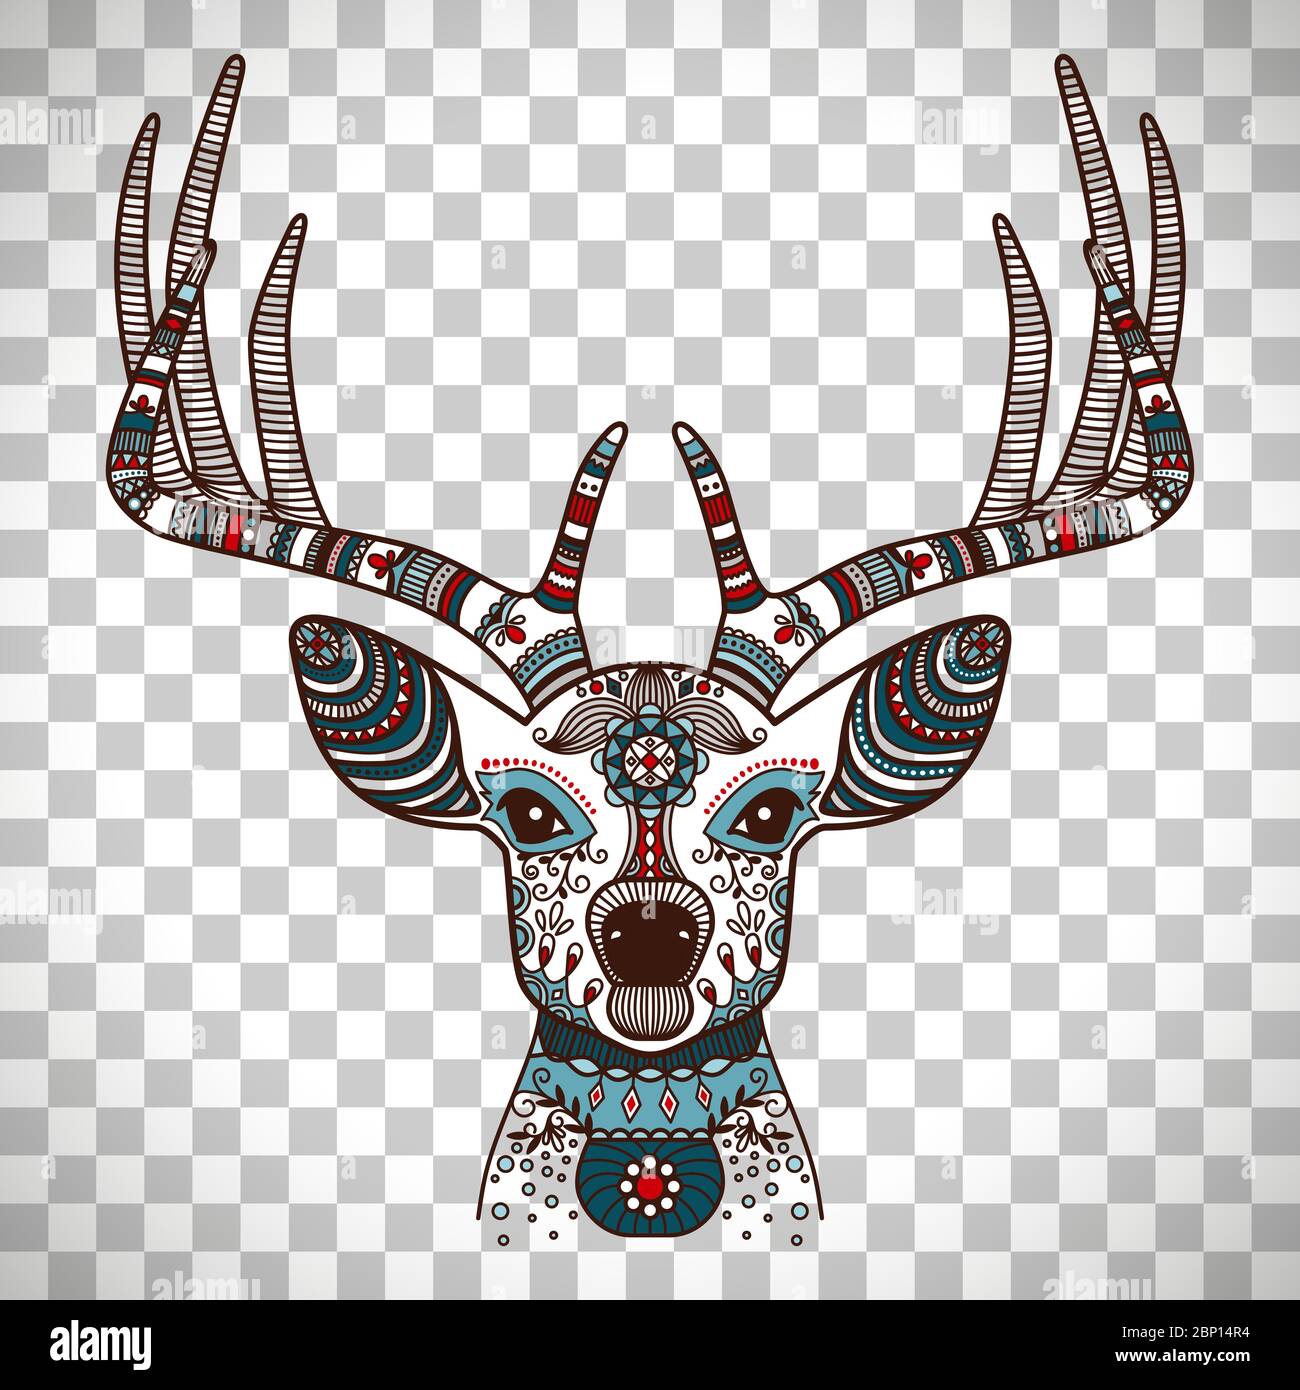 Colorful head of deer with ethnic ornament vector logo isolated on transparent background Stock Vector